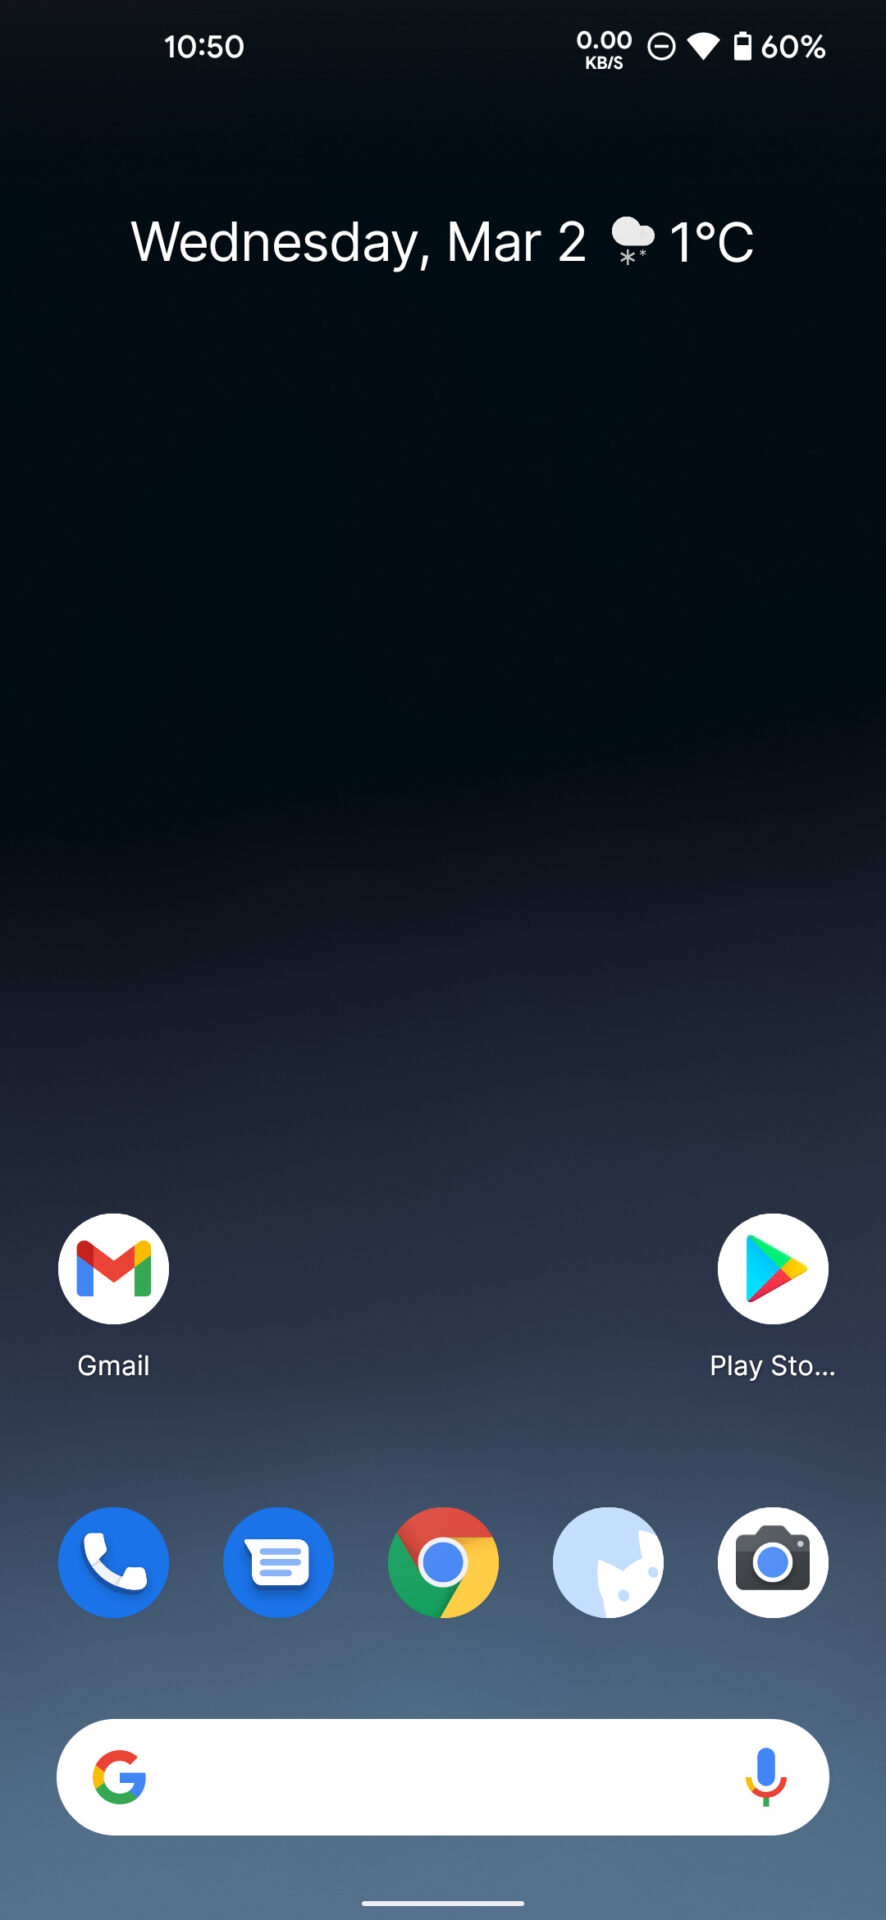 Google Pixel Live Wallpapers (1 to 6) APK's for All Android Devices  (Updated 6 December 2022, Live Bloom) - xiaomiui